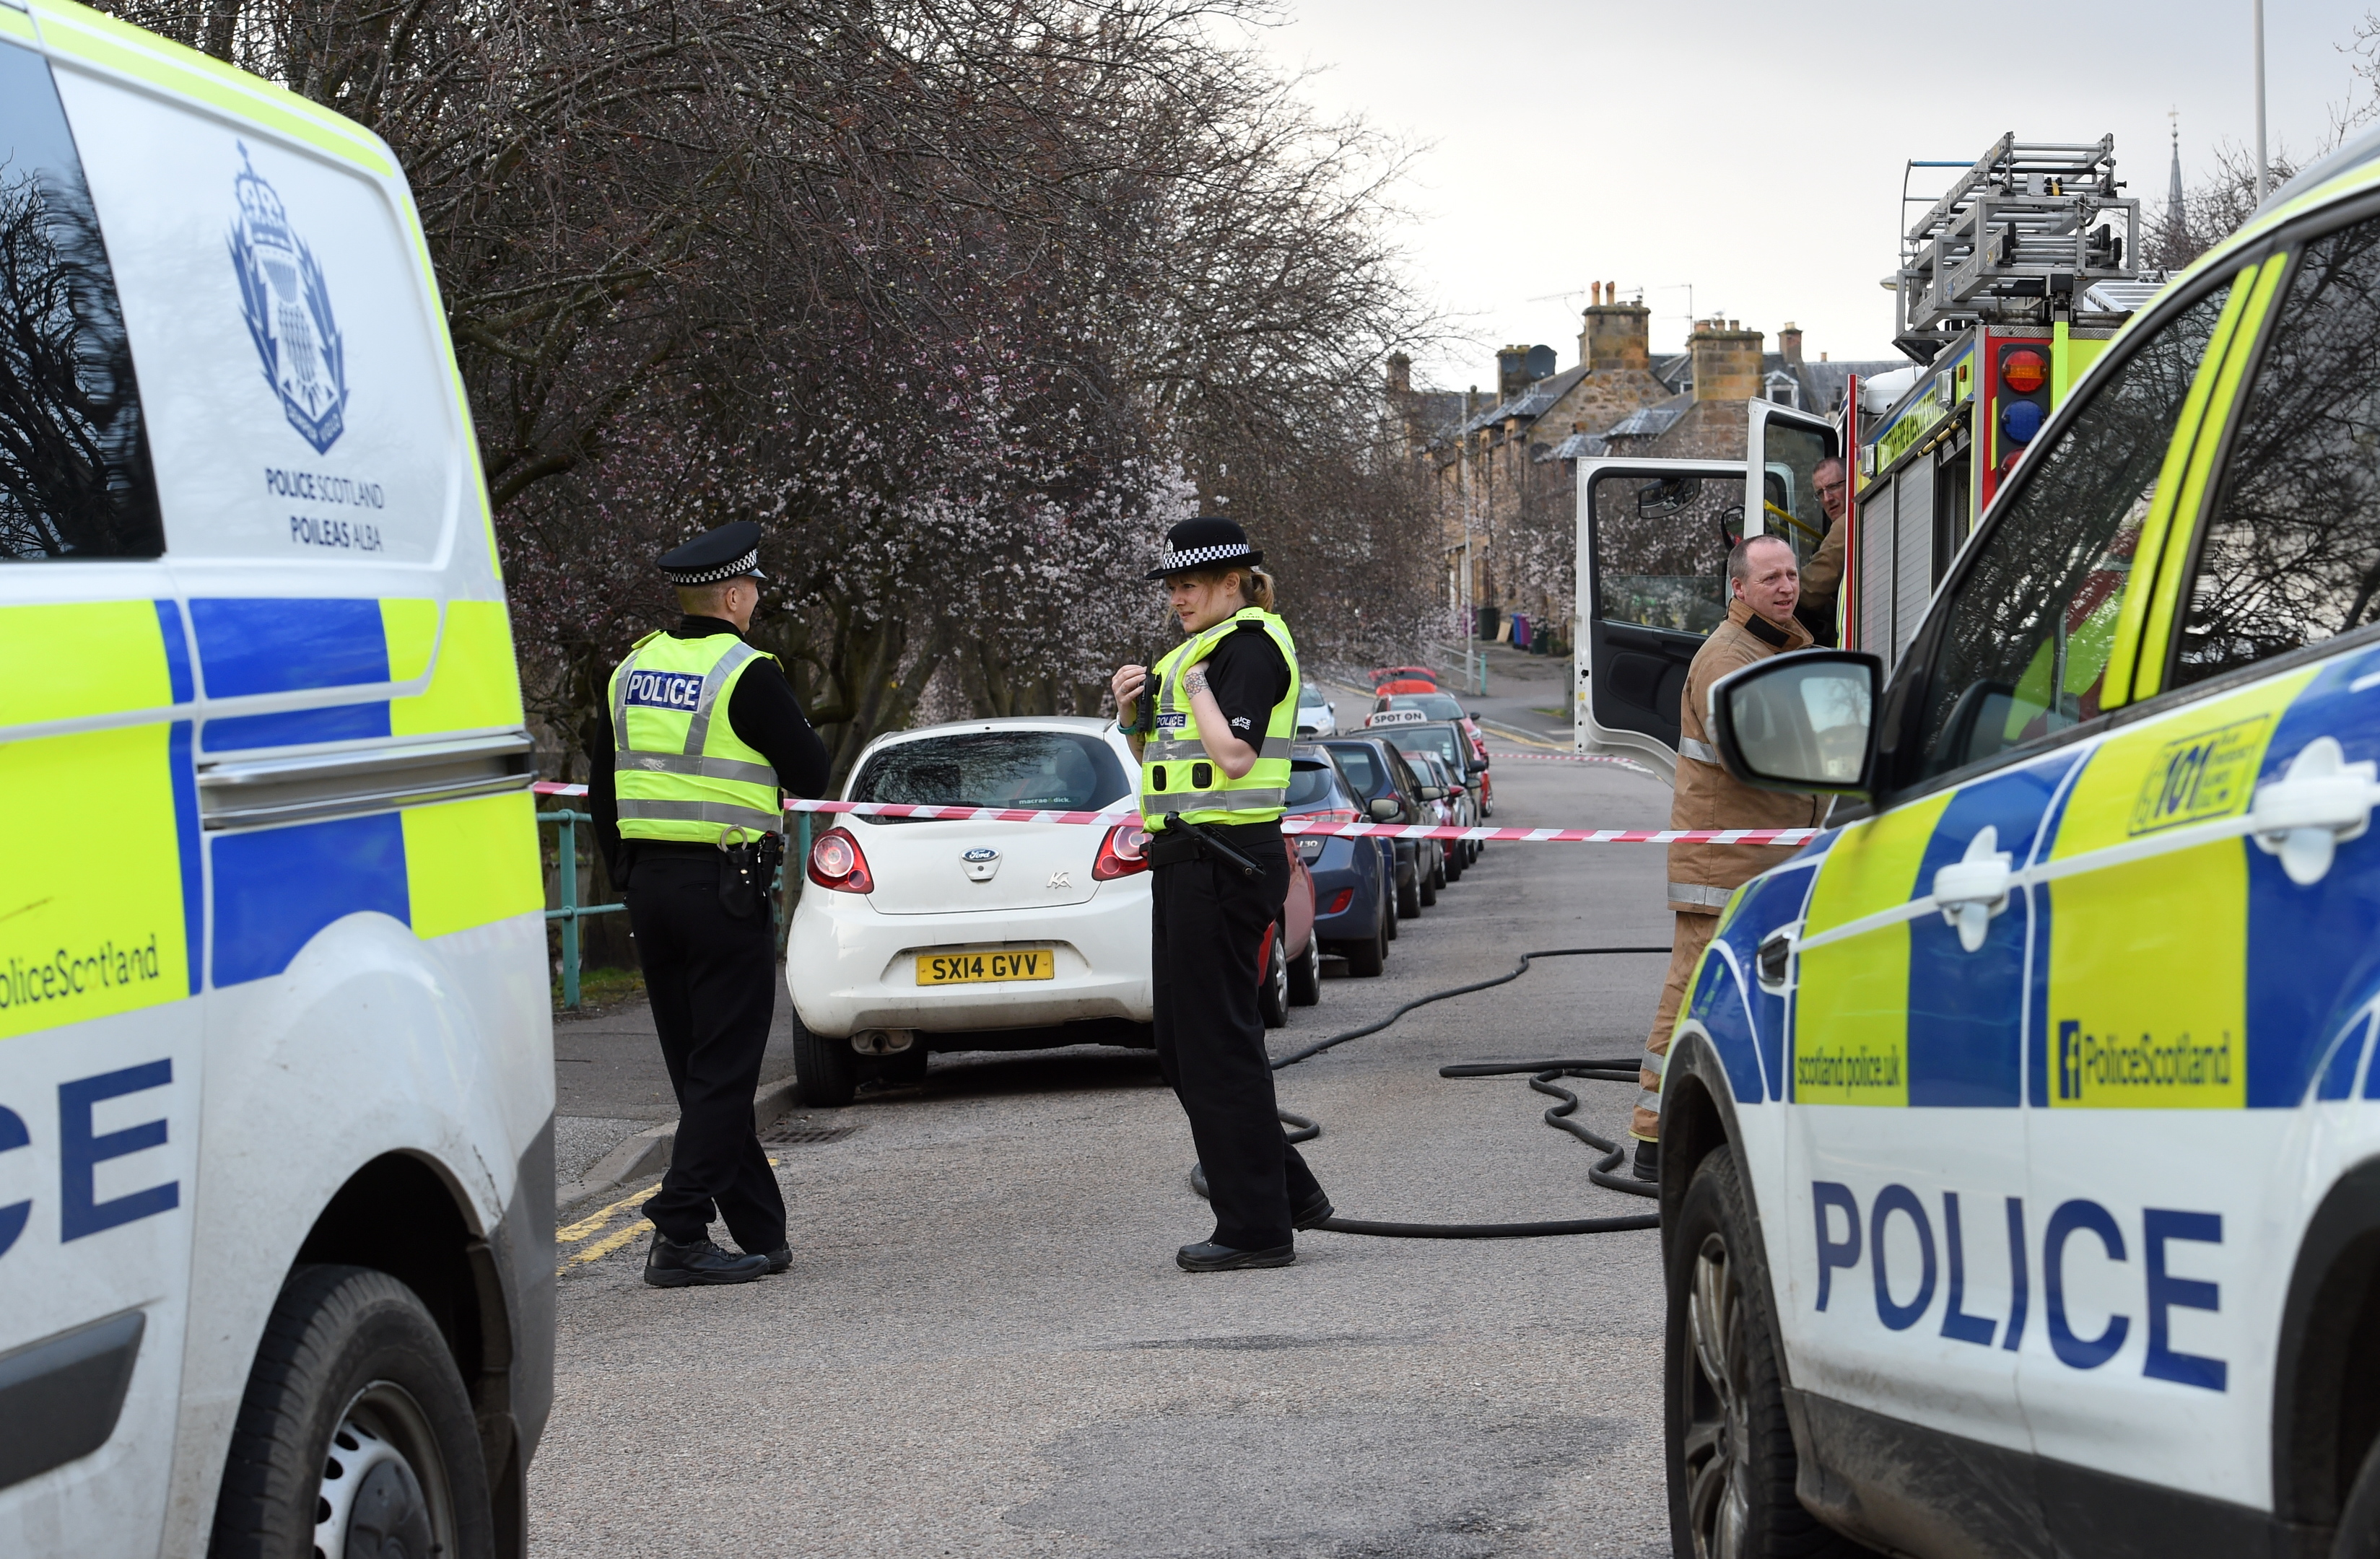 Castlehill Road in Forres is closed off due to a car leaking LPG gas